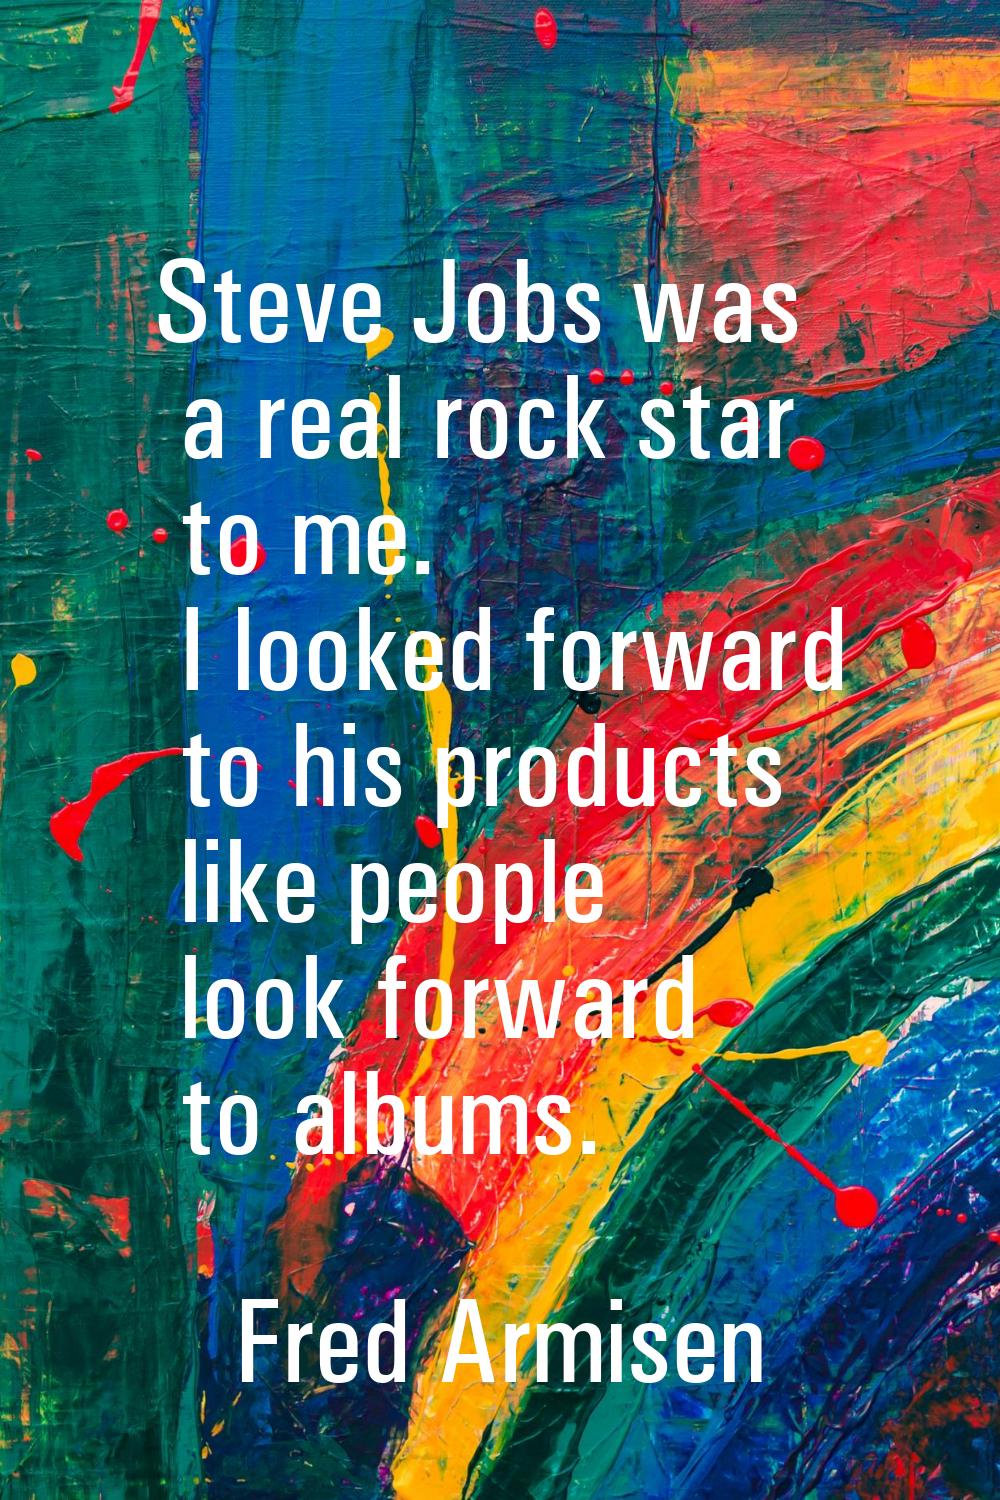 Steve Jobs was a real rock star to me. I looked forward to his products like people look forward to